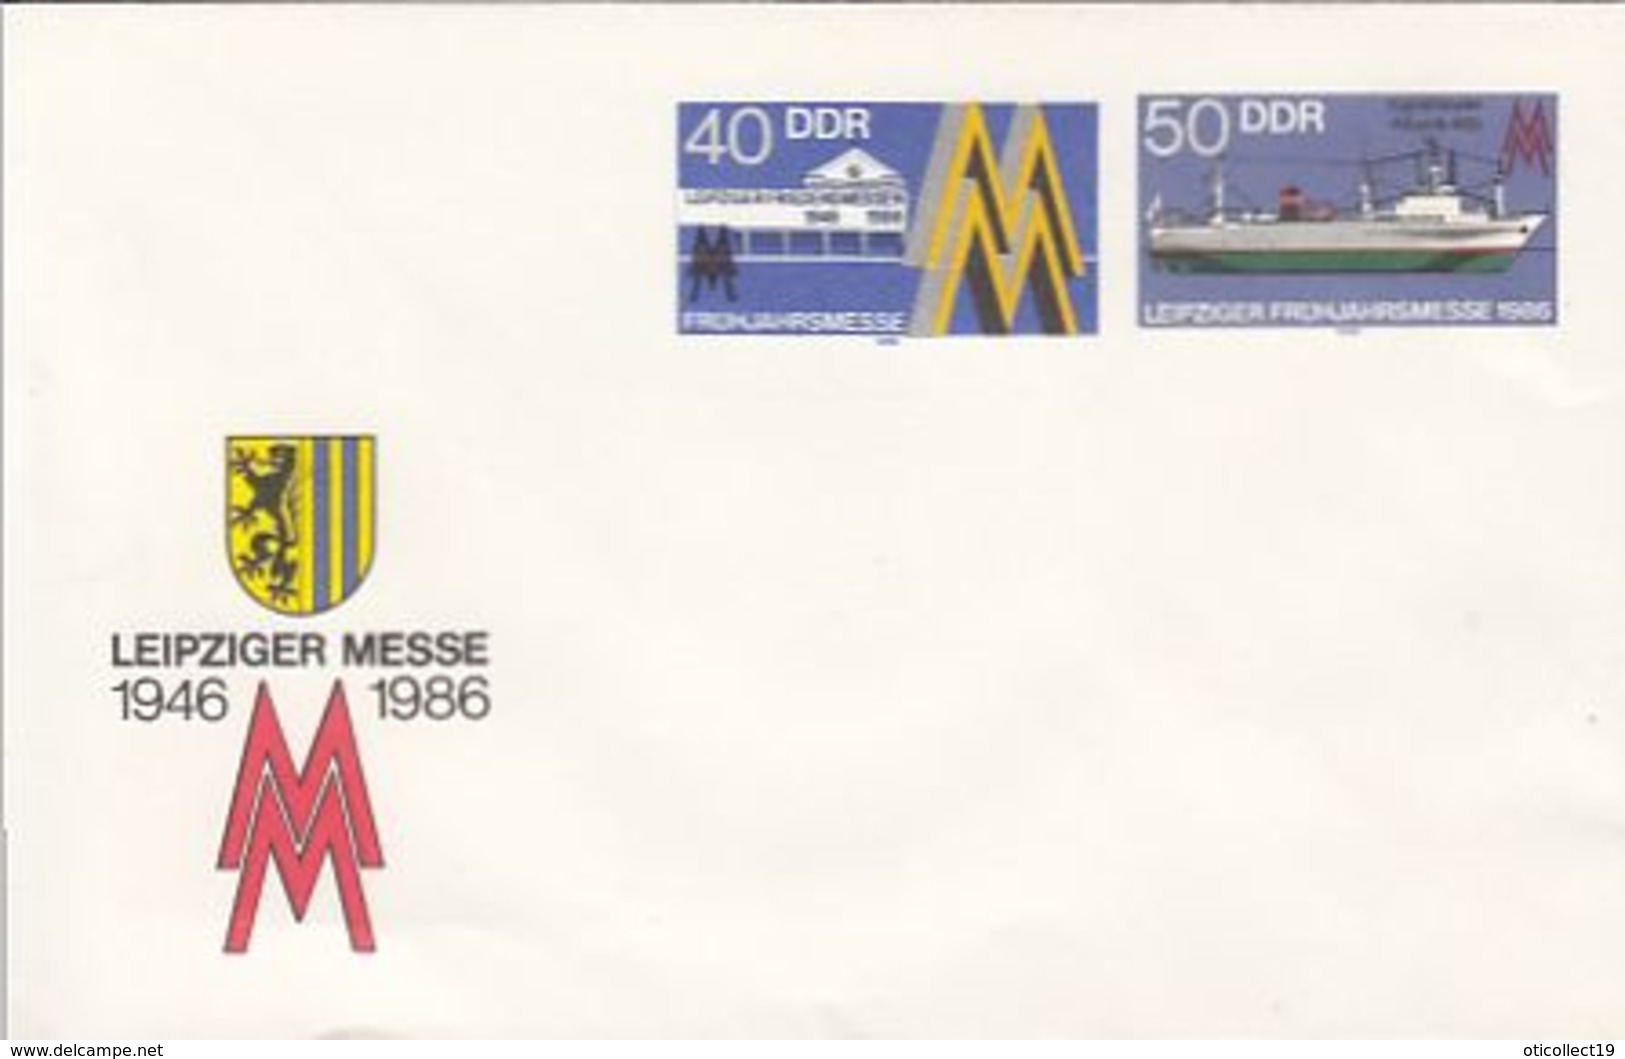 LEIPZIG FAIR, COAT OF ARMS, SHIPP, COVER STATIONERY, 1986, GERMANY-DDR - Sobres - Nuevos